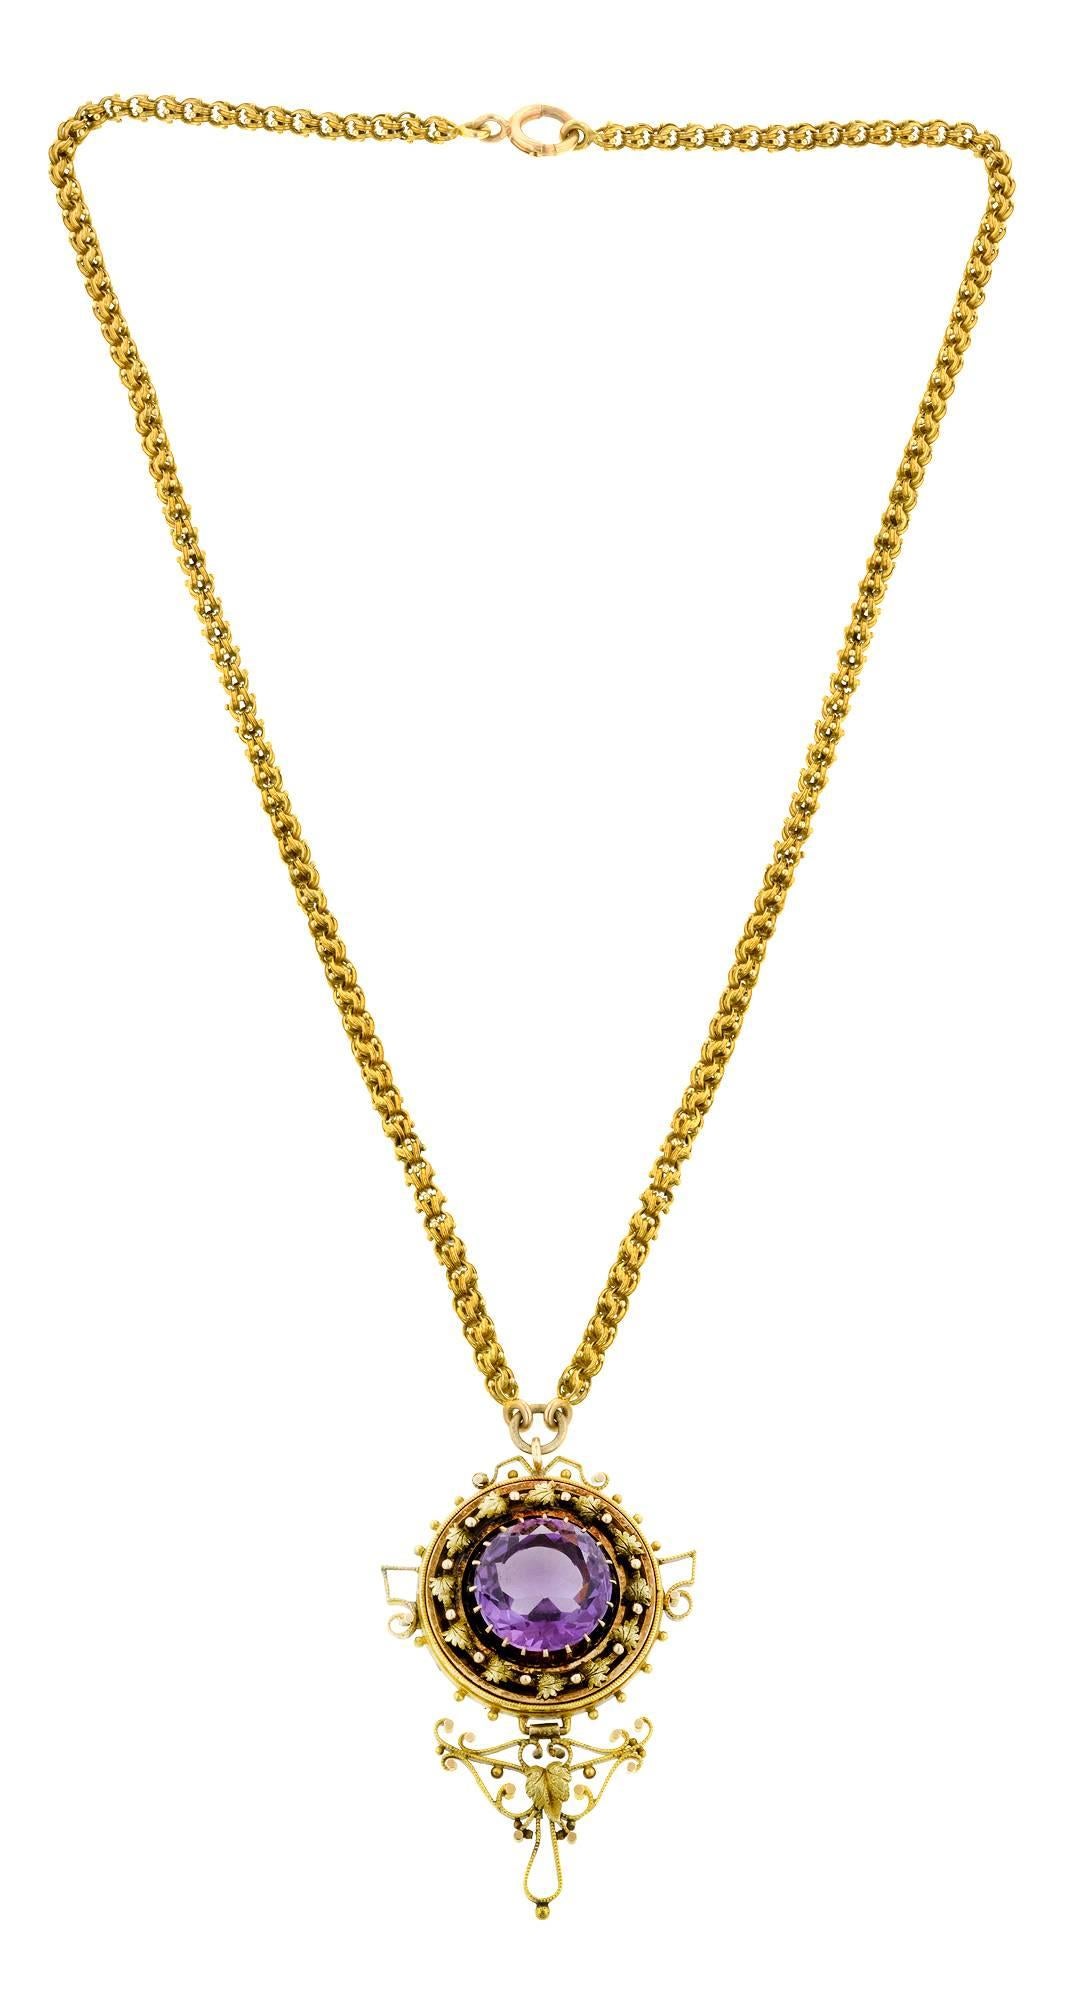 Antique Victorian Amethyst Gold Necklace In Good Condition For Sale In New York, NY